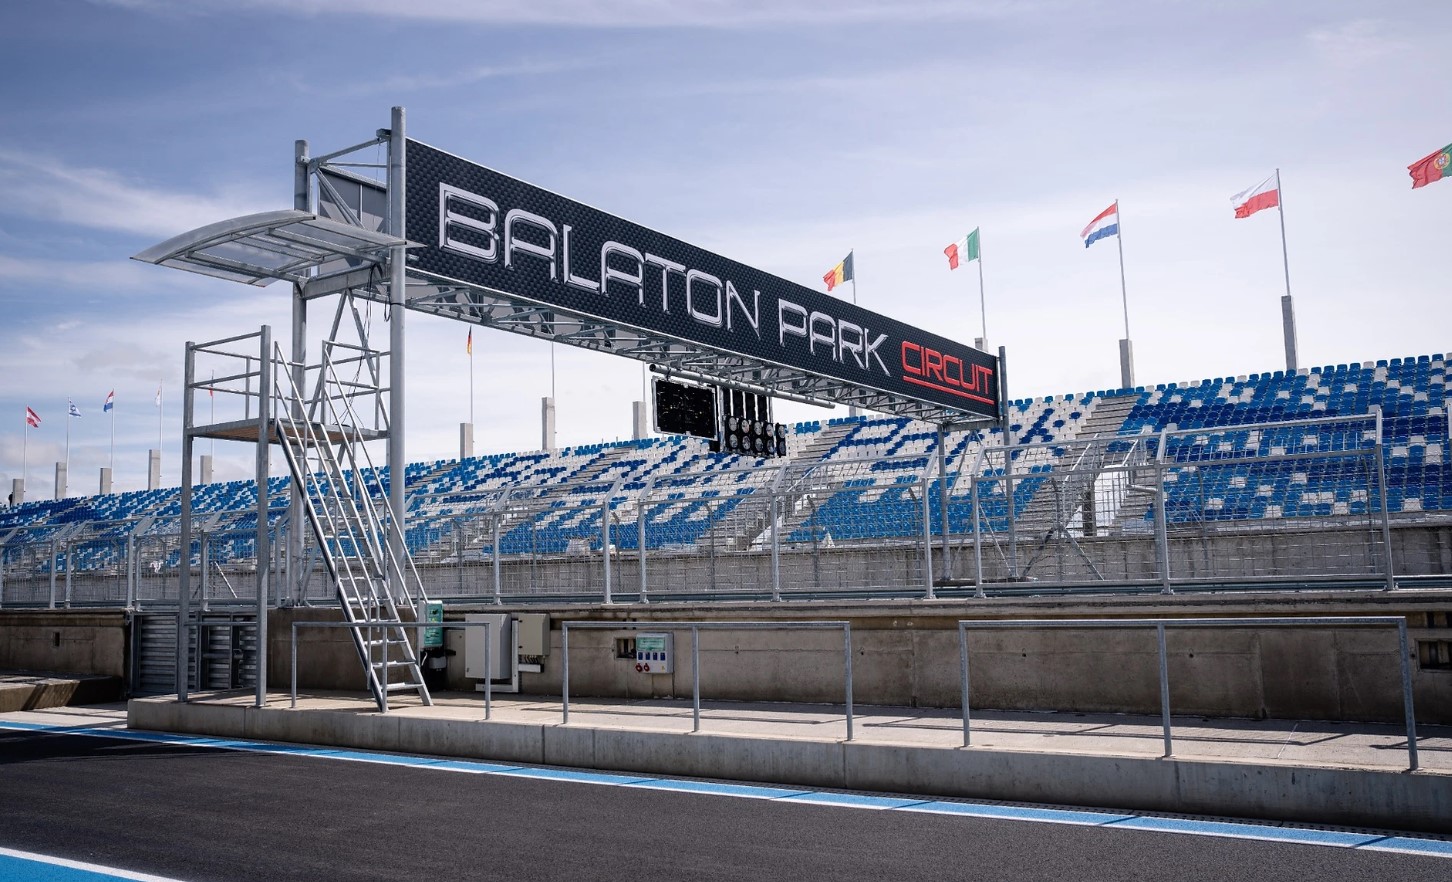 Adrienn Walterné Dancsó and the team work hard to prepare Balaton Park for the first race event